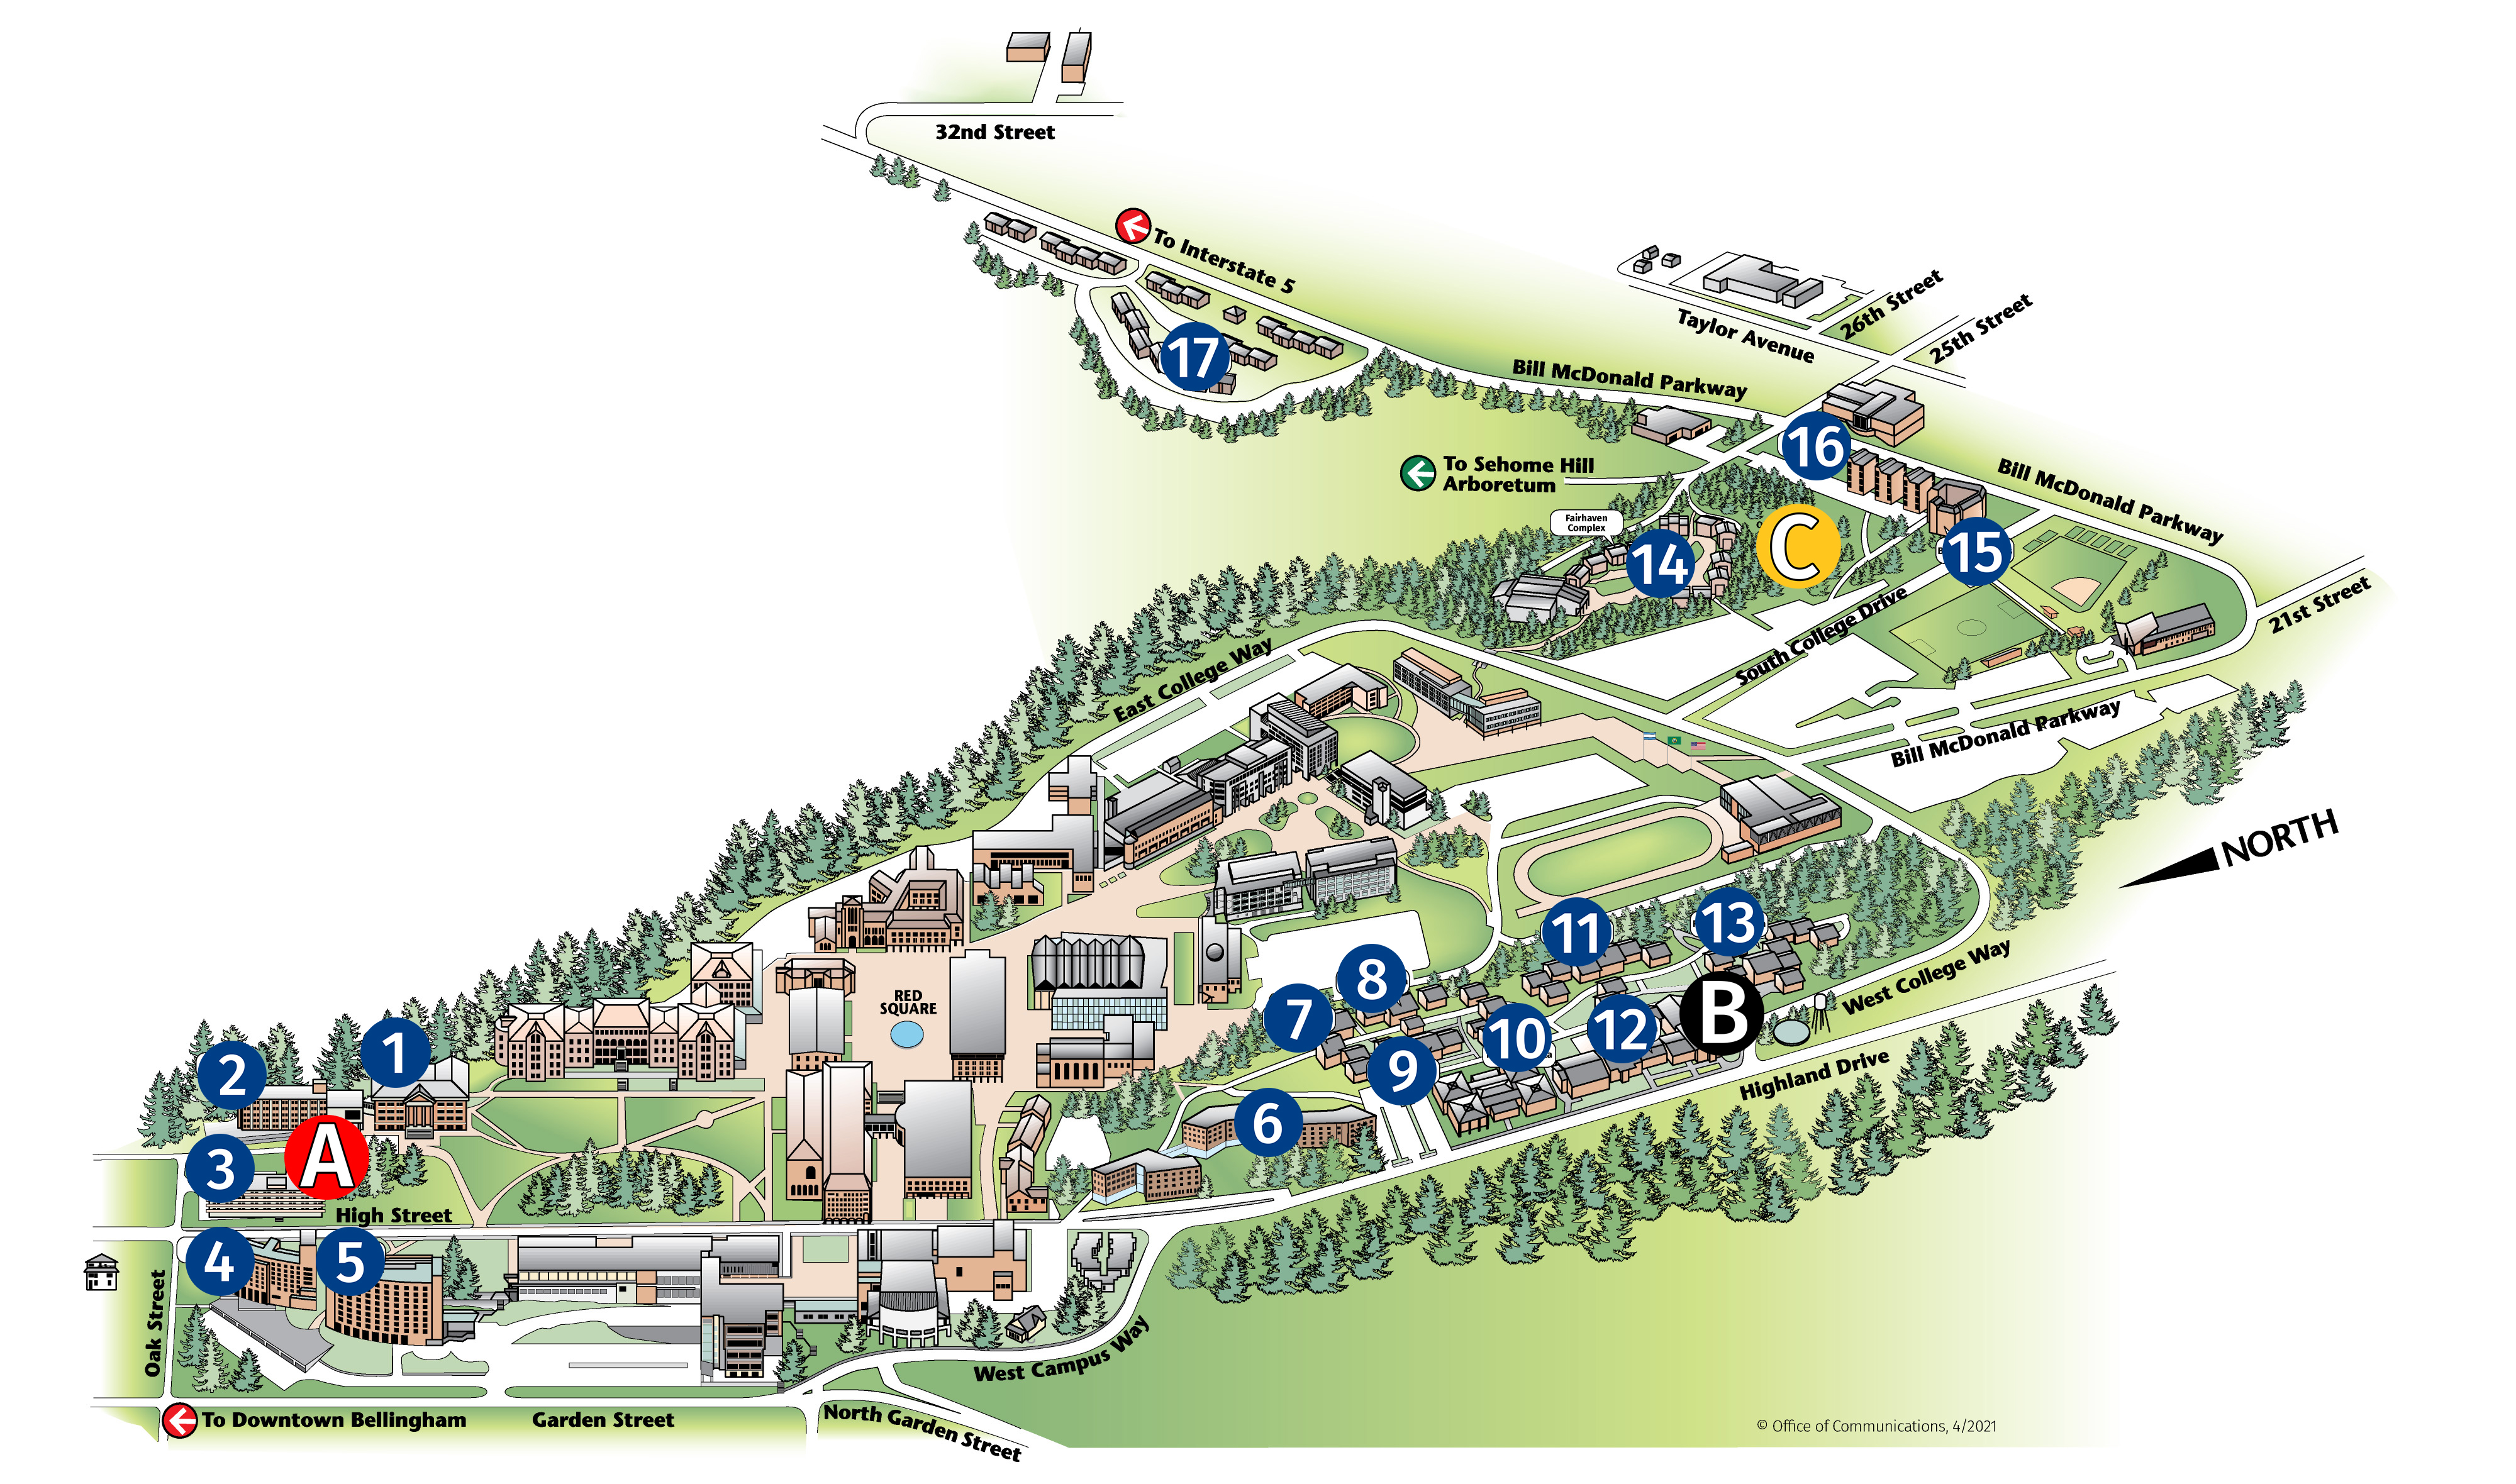 A colorful bird's eye view map of the three campus neighborhoods: North Campus, Ridgeway, and South Campus